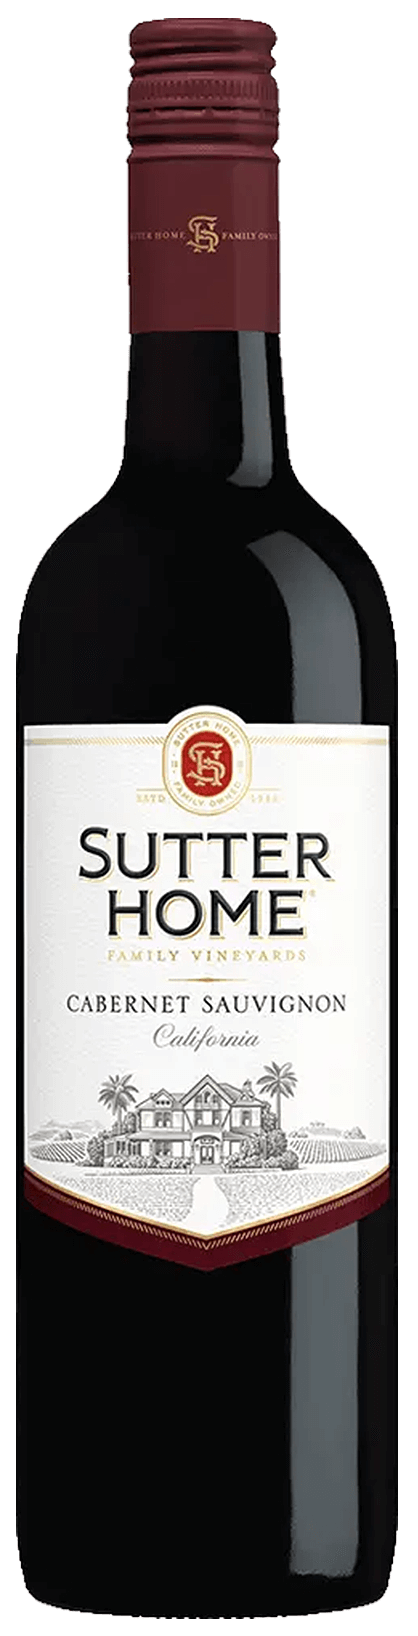 sutter home wines